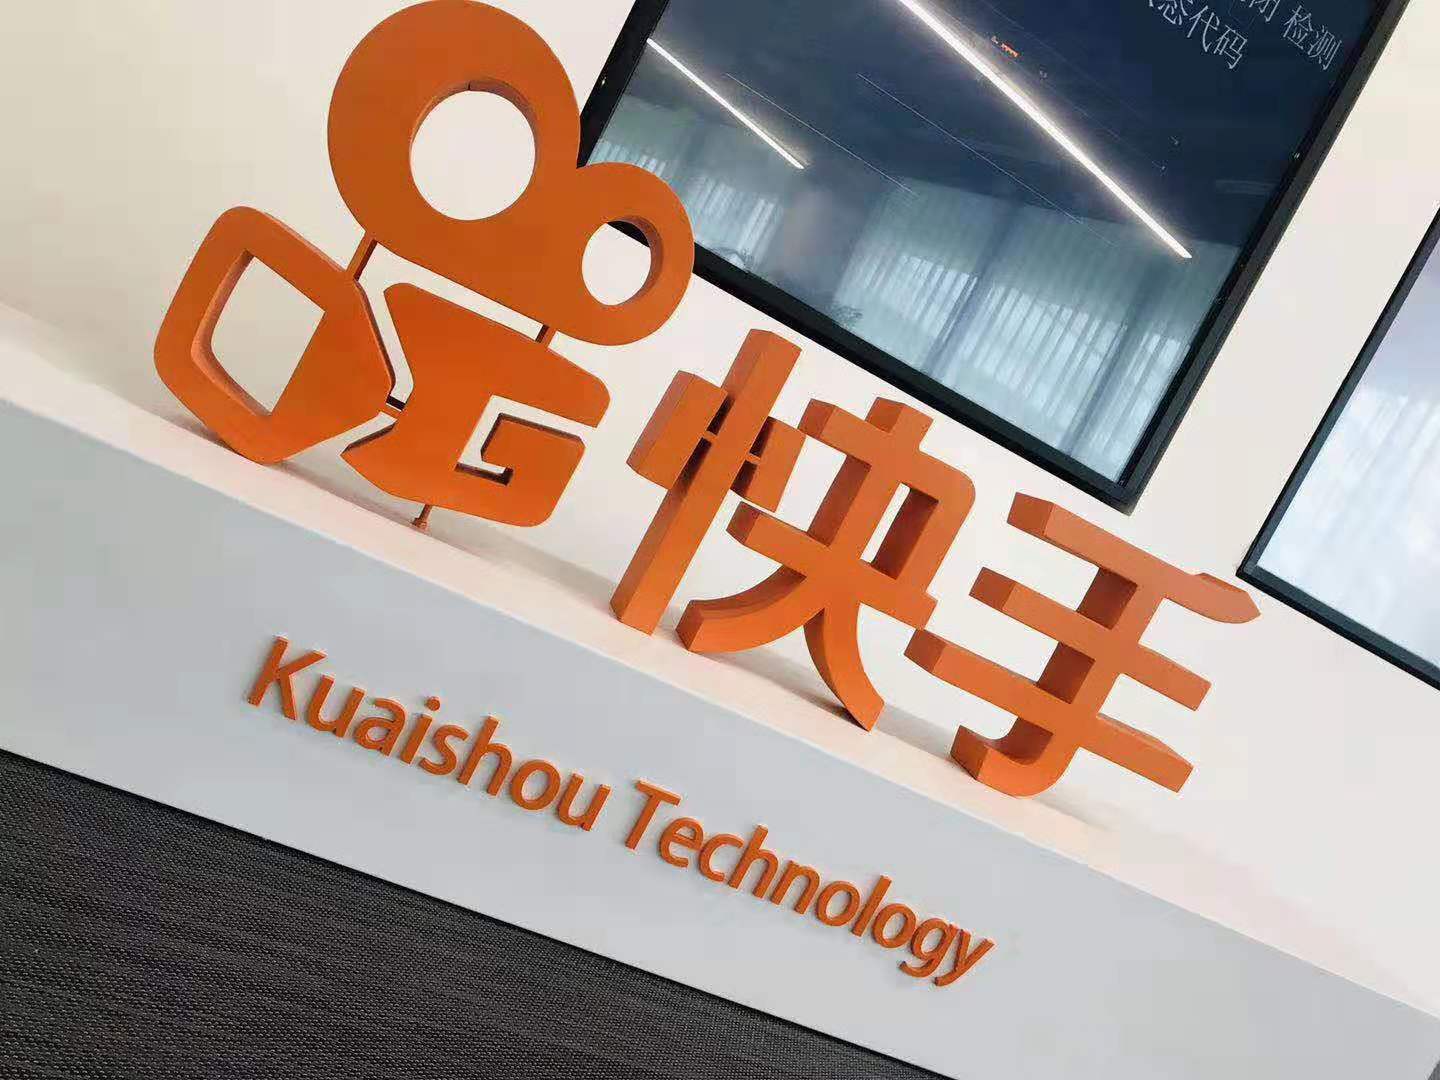 Short-video app Kuaishou has the most active daily users in China’s video game streaming sector